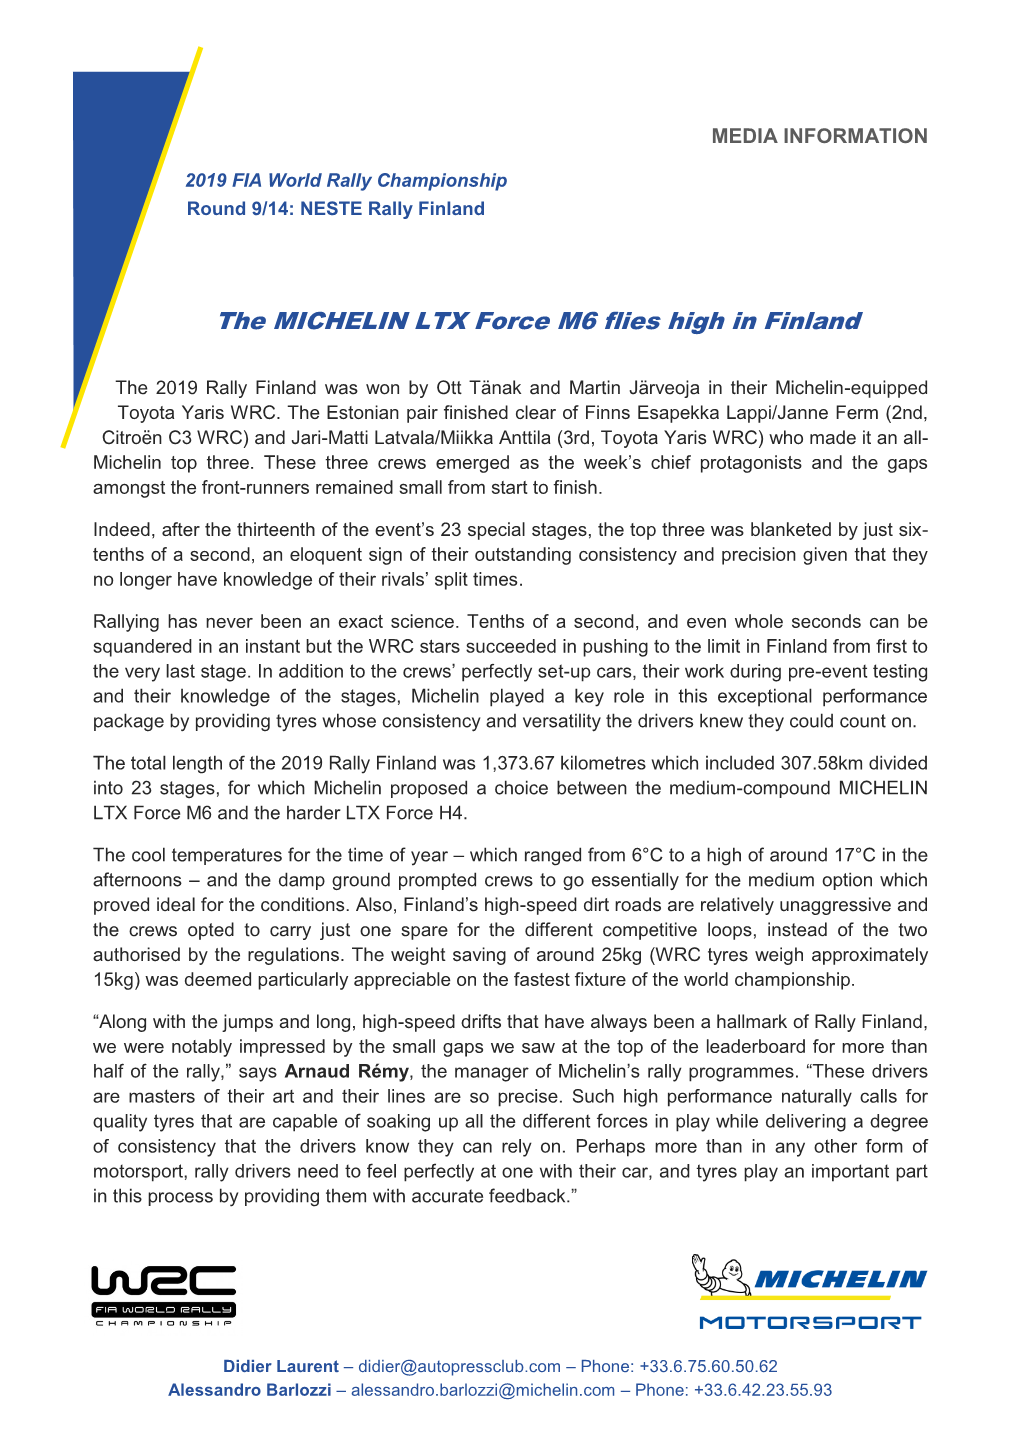 The MICHELIN LTX Force M6 Flies High in Finland